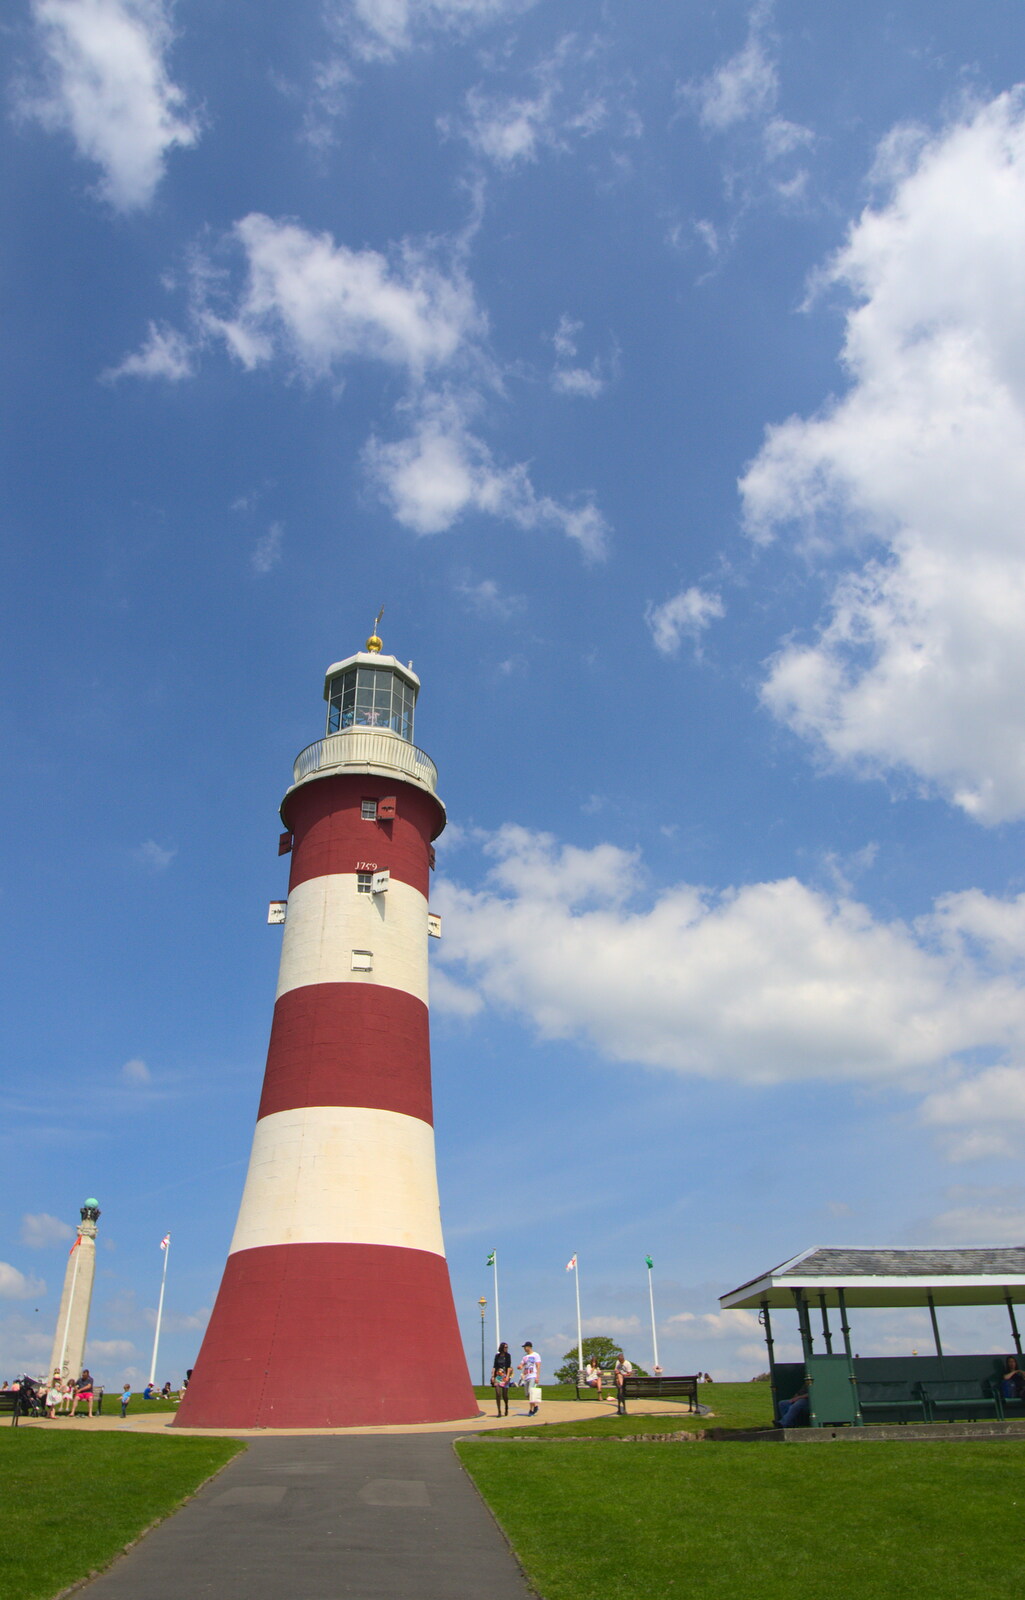 Compulsory cliché photo of Smeaton's Tower from A Tamar River Trip, Plymouth, Devon - 30th May 2016